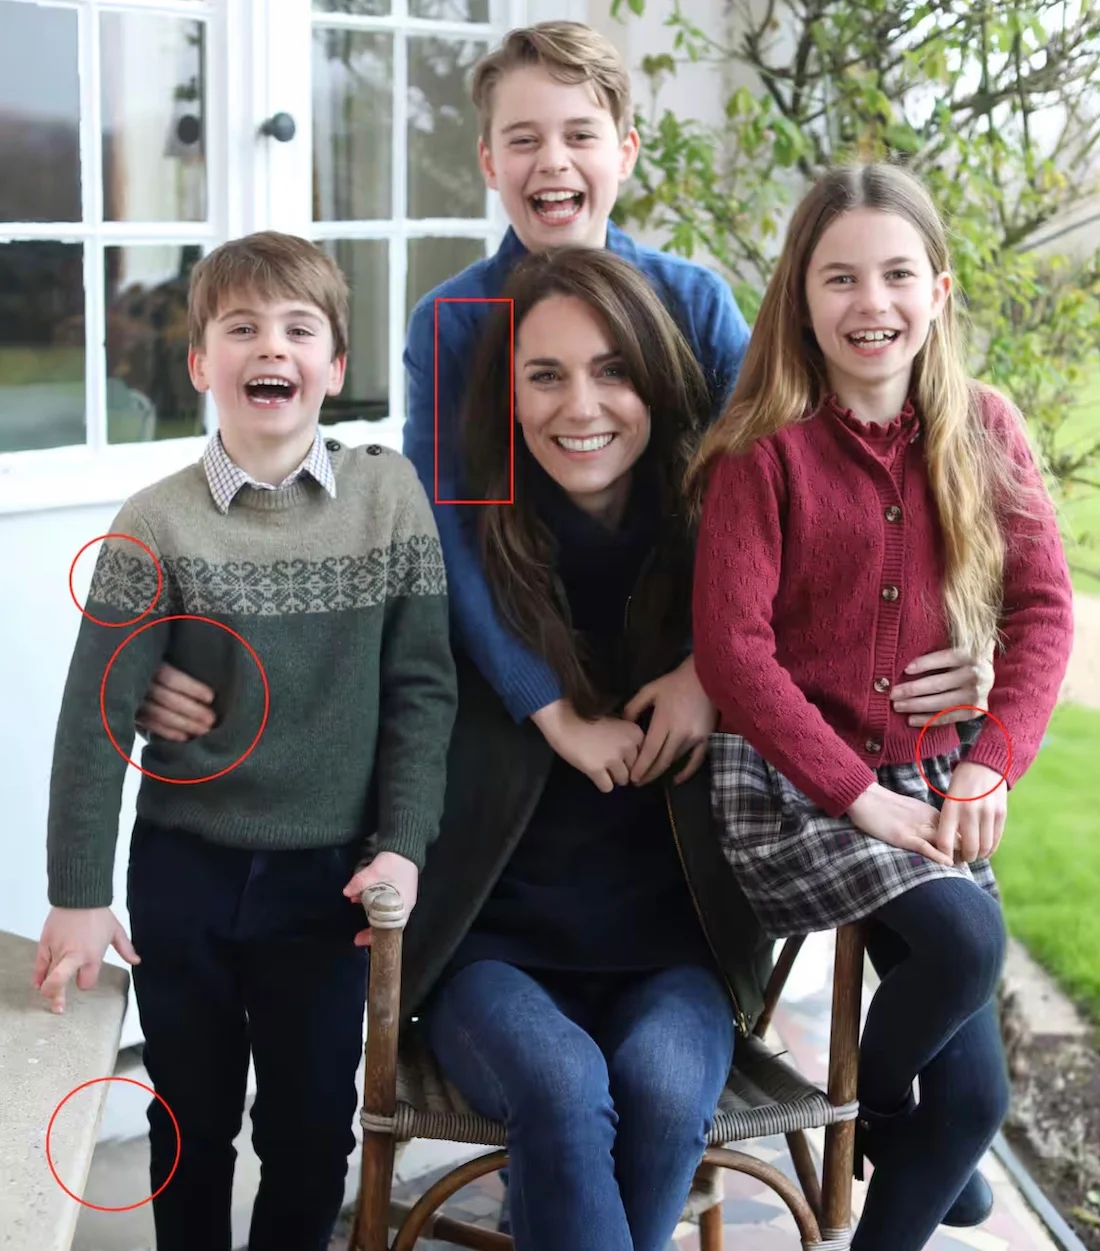 Why Kate Middleton's photo caused so much controversy